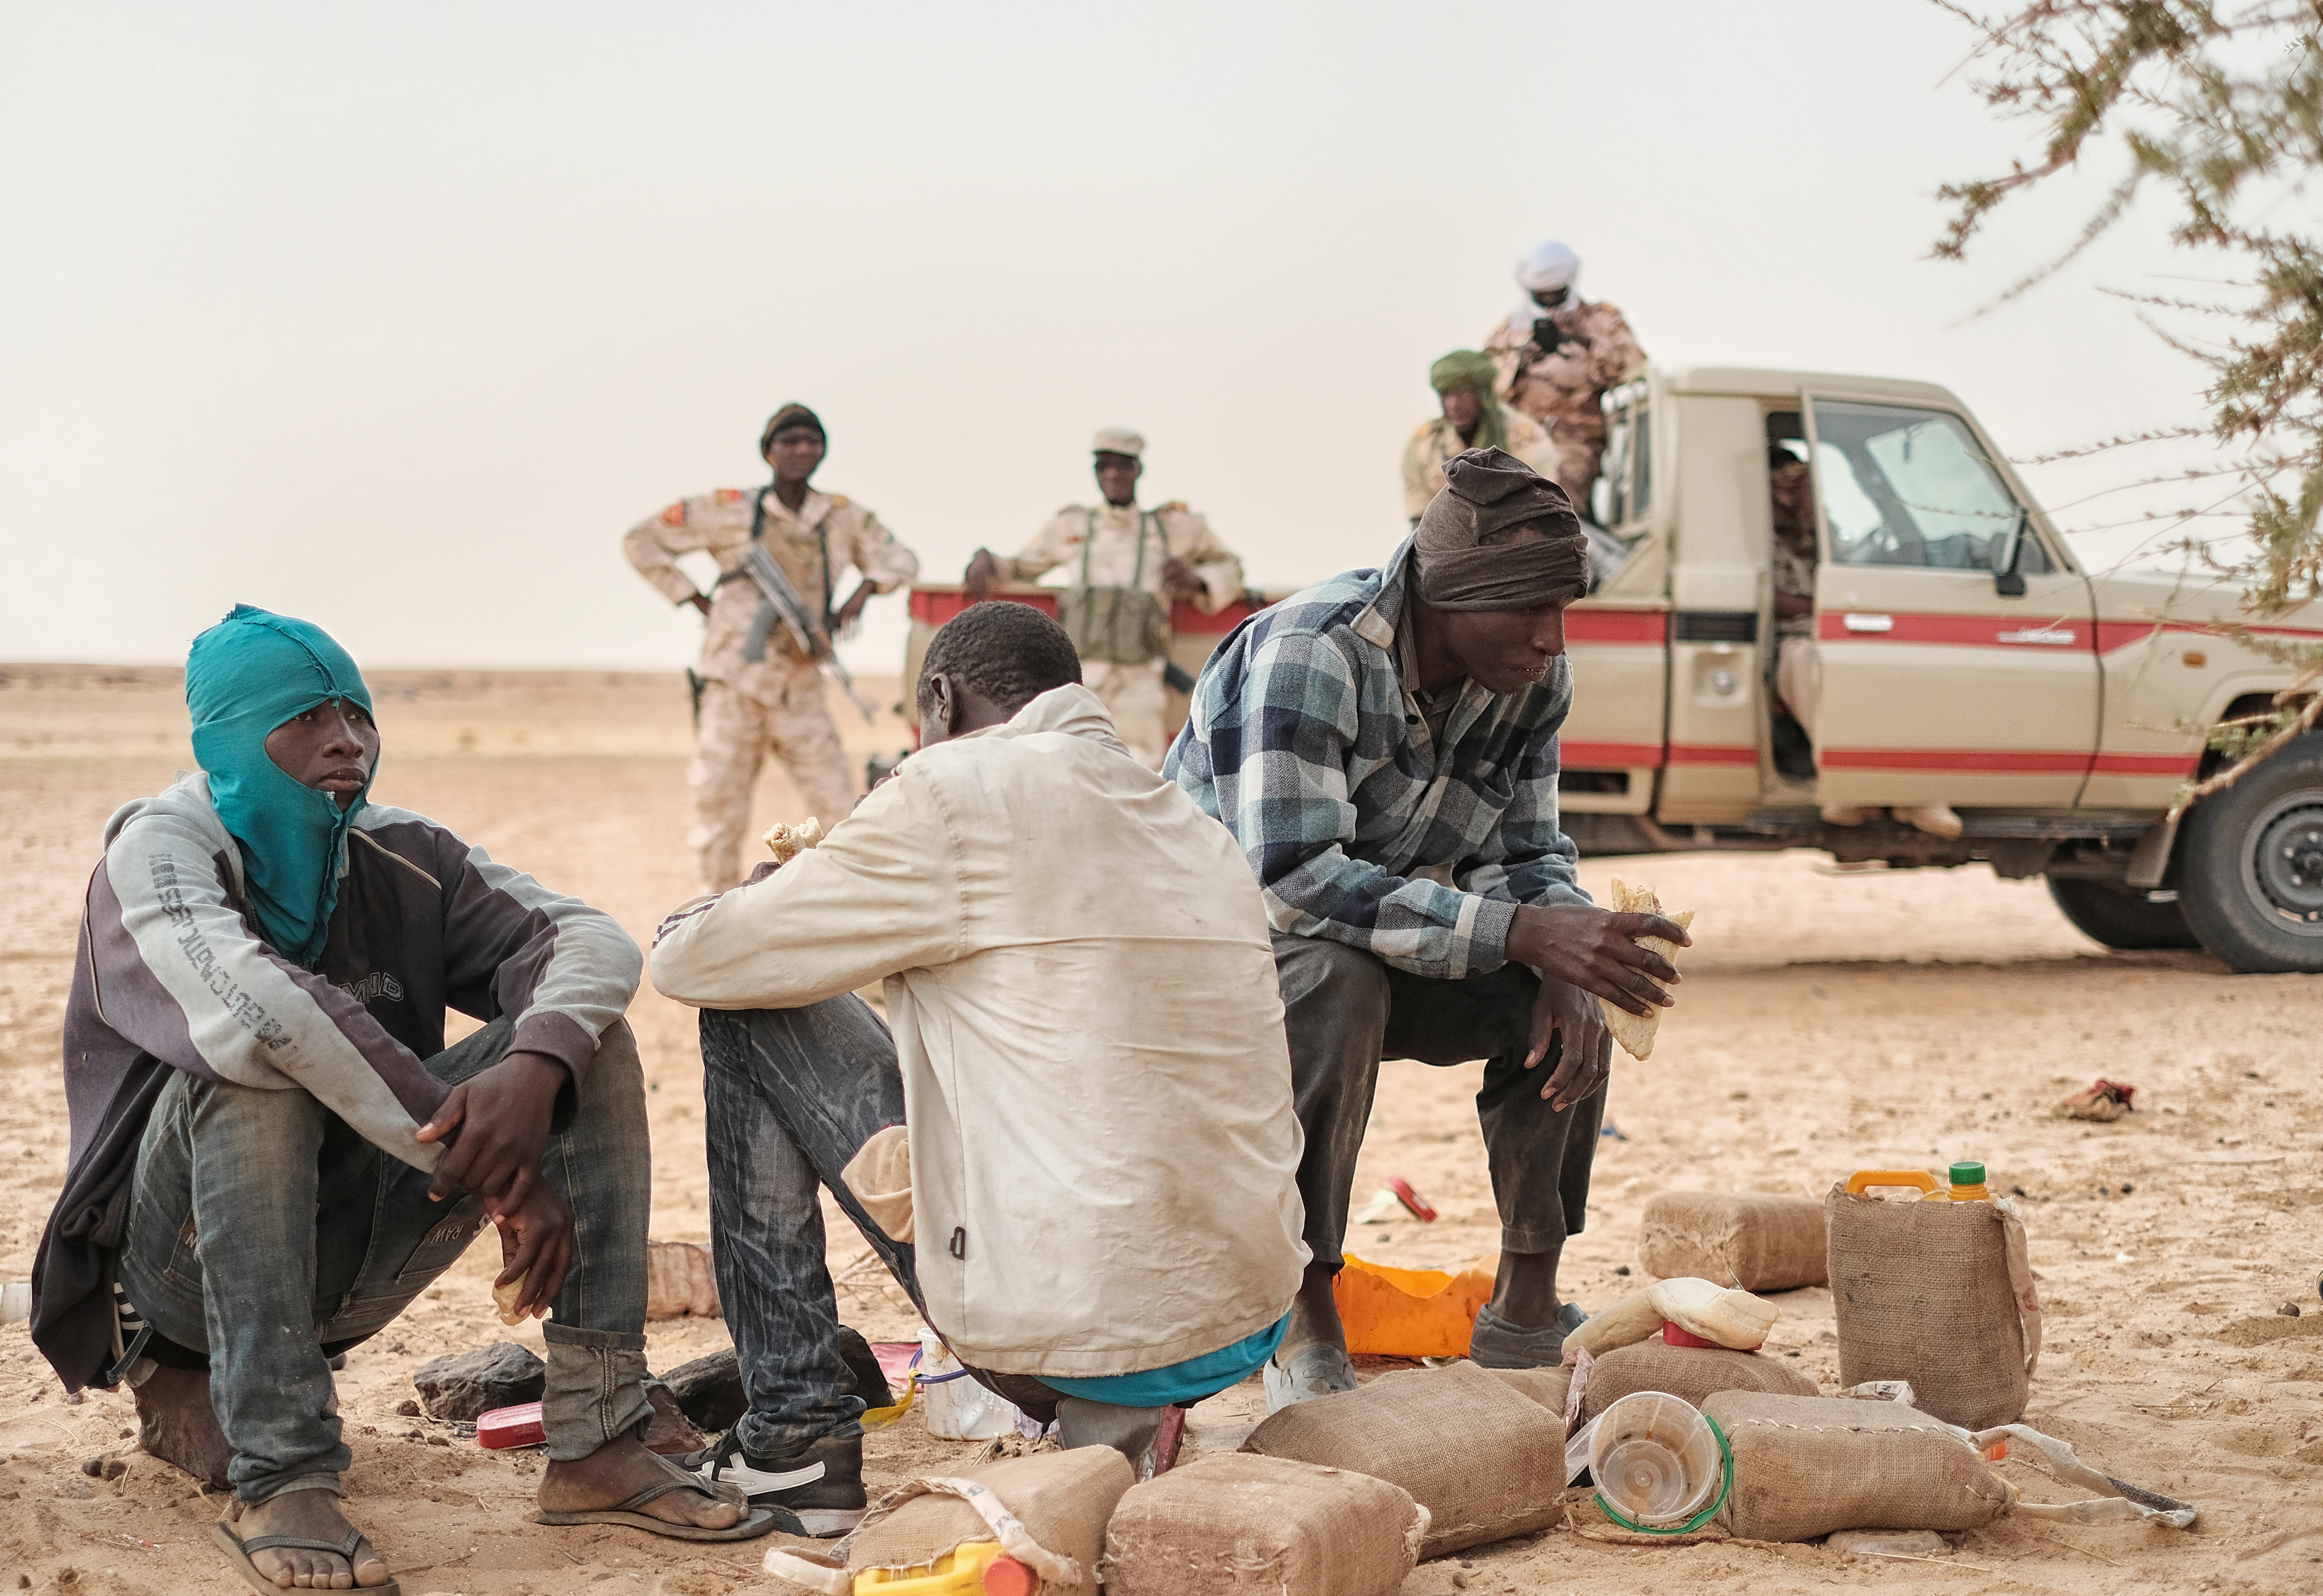 Migrants abandoned in the Sahara are found by a military patrol on the route to Libya (Image: Giacomo Zandonini)